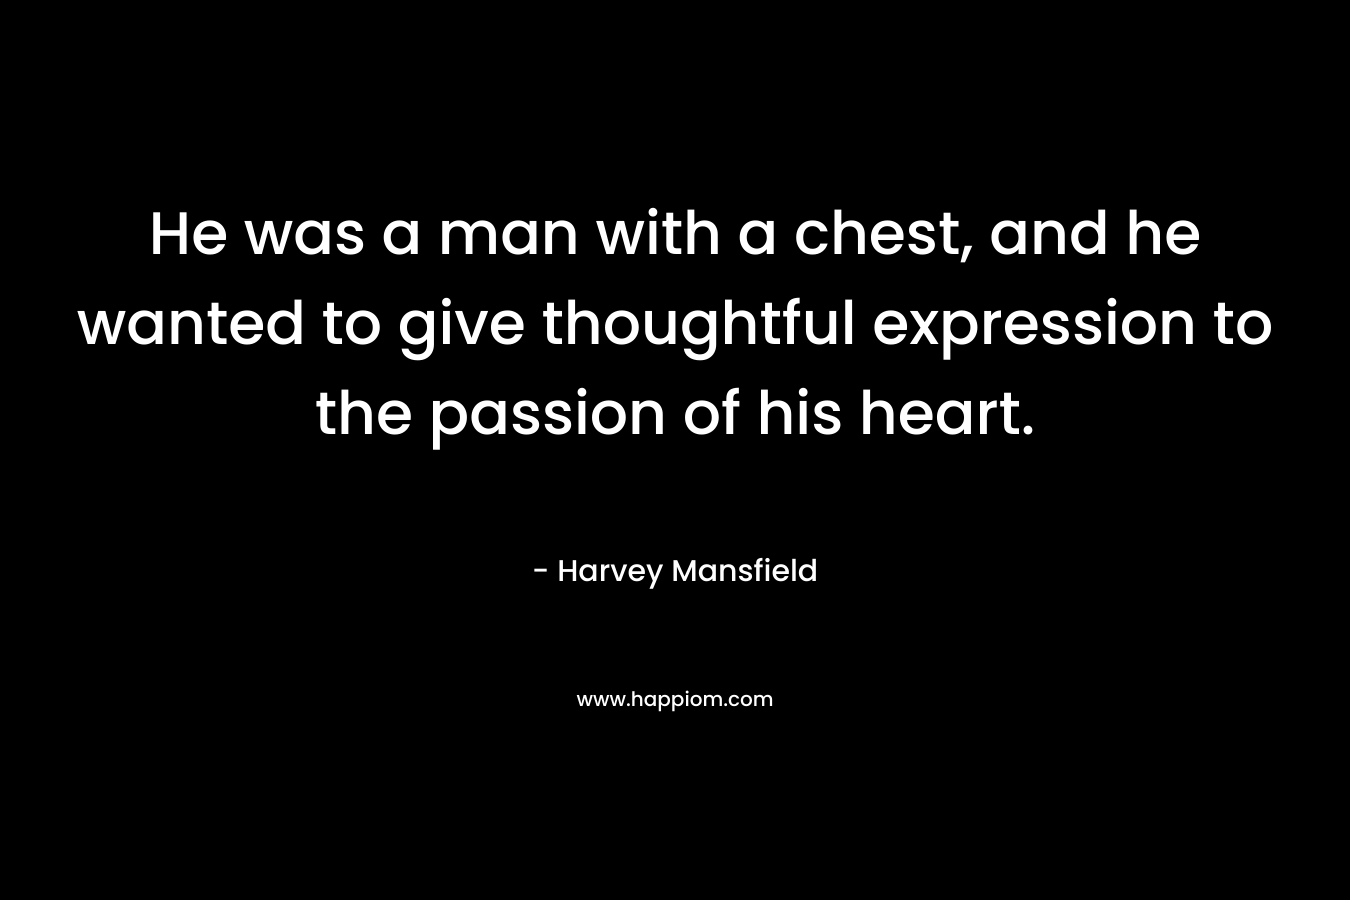 He was a man with a chest, and he wanted to give thoughtful expression to the passion of his heart.